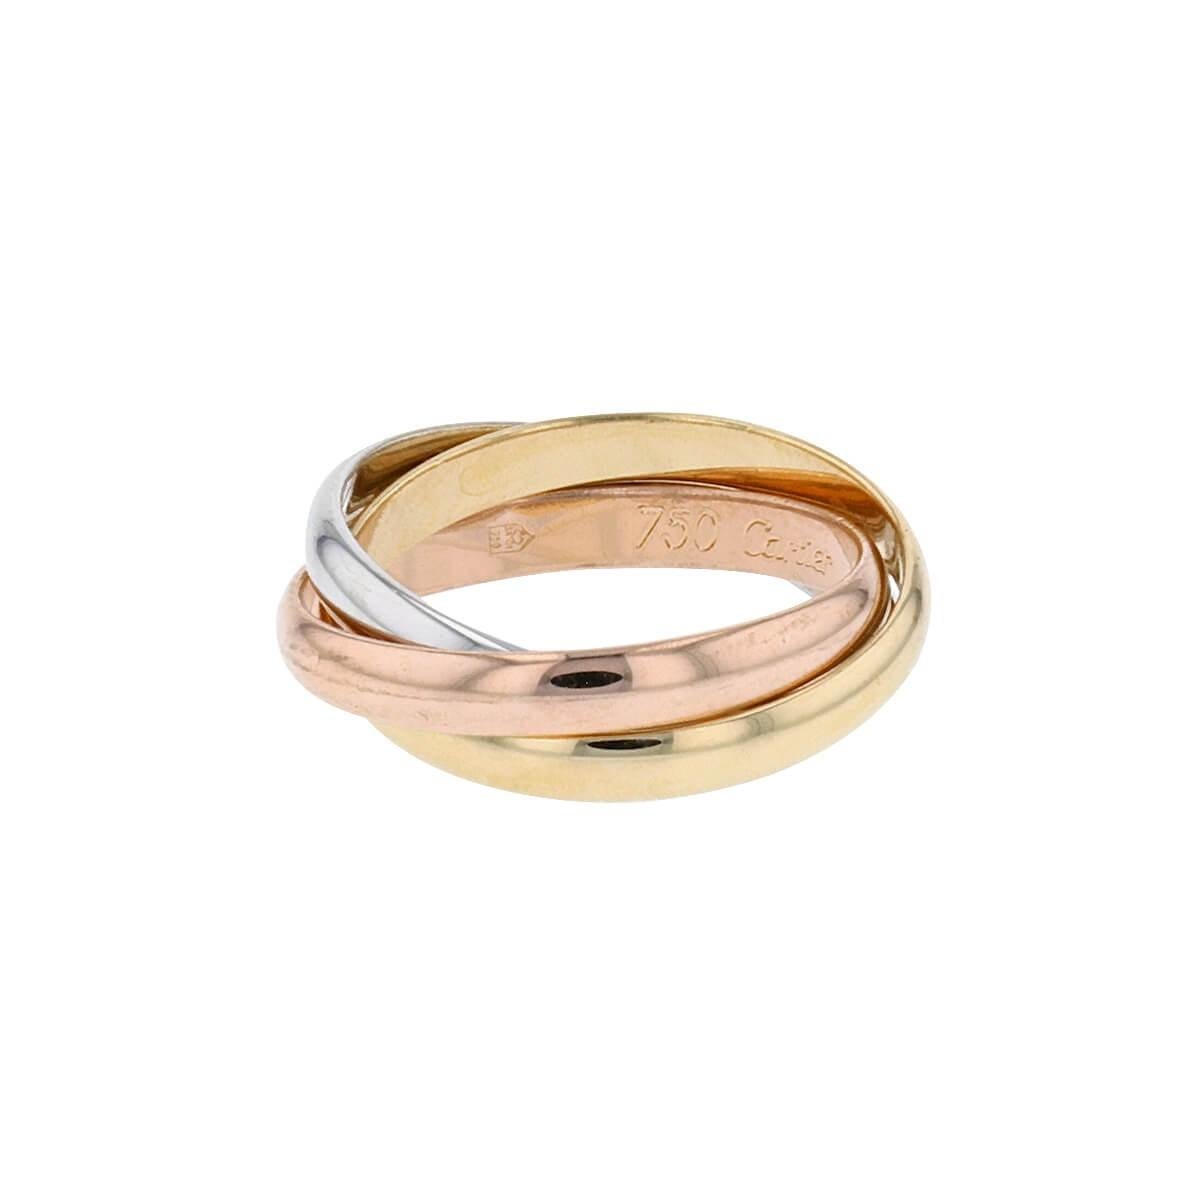 Elegant Trinity ring, small model with 3 interlaced mobile rings, 18 carat white gold, 18 carat pink gold, 18 carat yellow gold.

Small model

The 3 golds are 18 Karats, 750/1000ths.

Signed Cartier on the inside and numbered

Finger size : 51
It